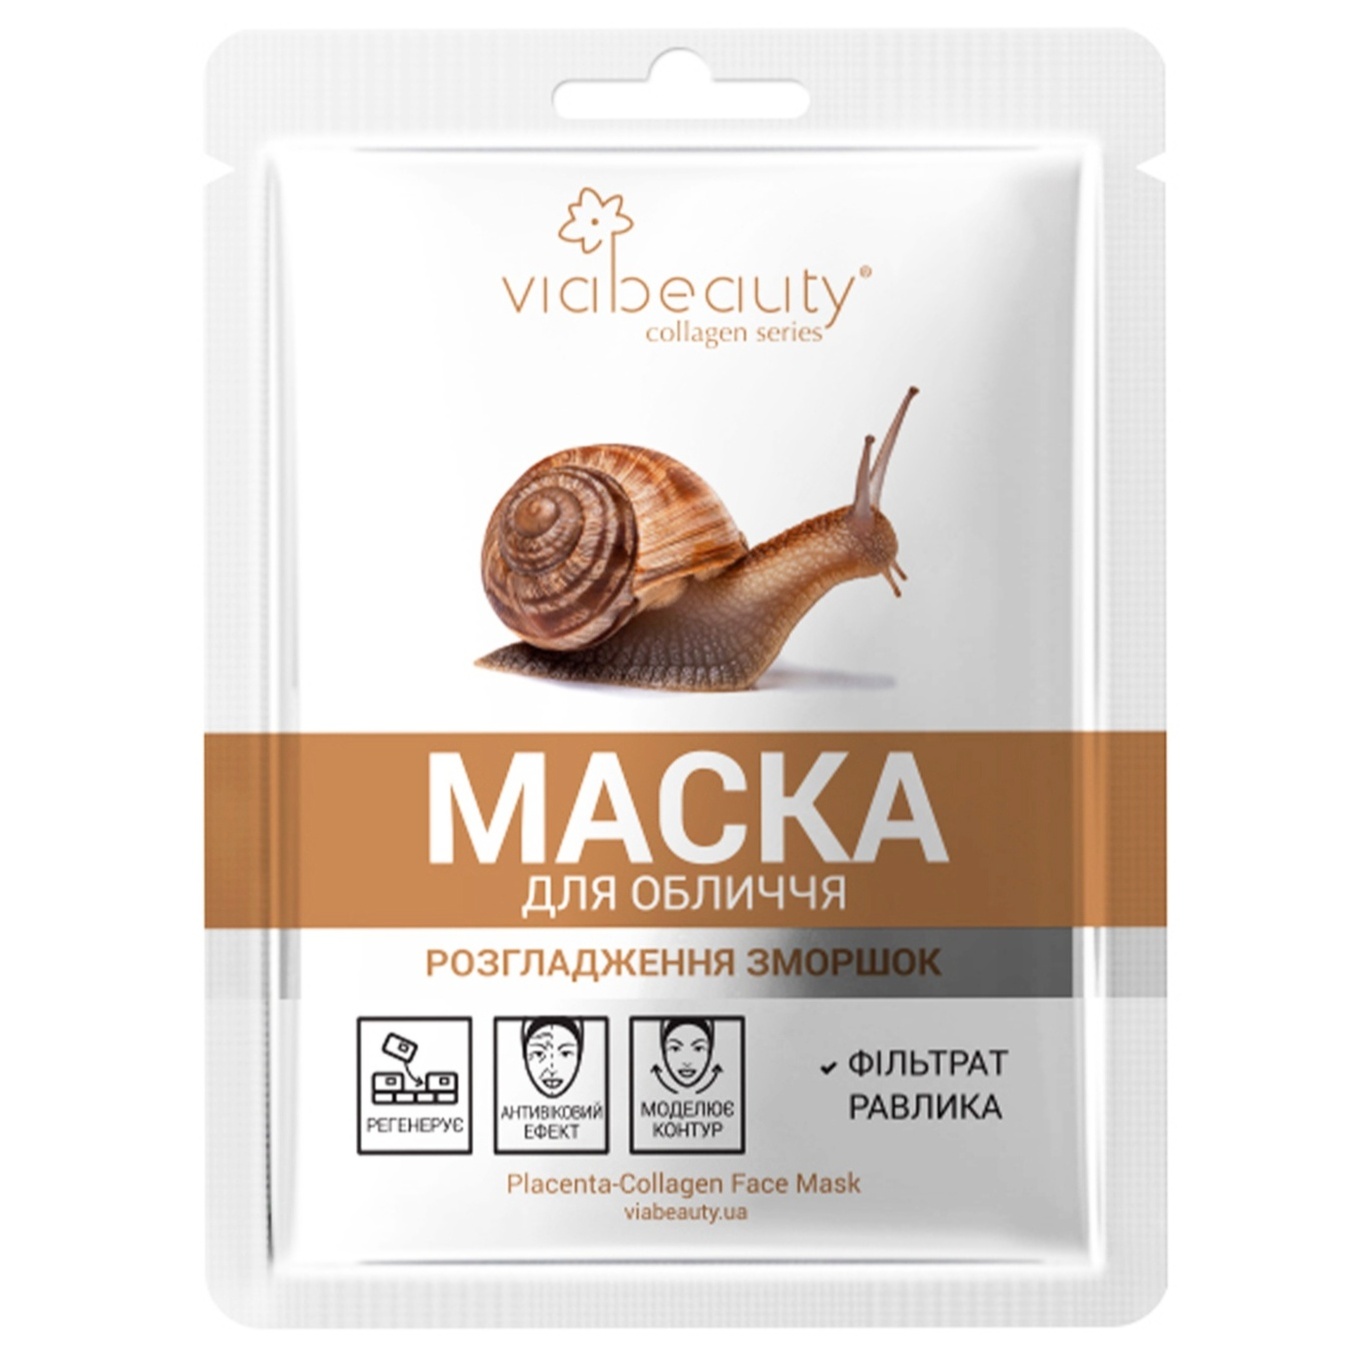 VIABEAUTY fabric face mask with snail filtrate and ceramides to smooth out wrinkles